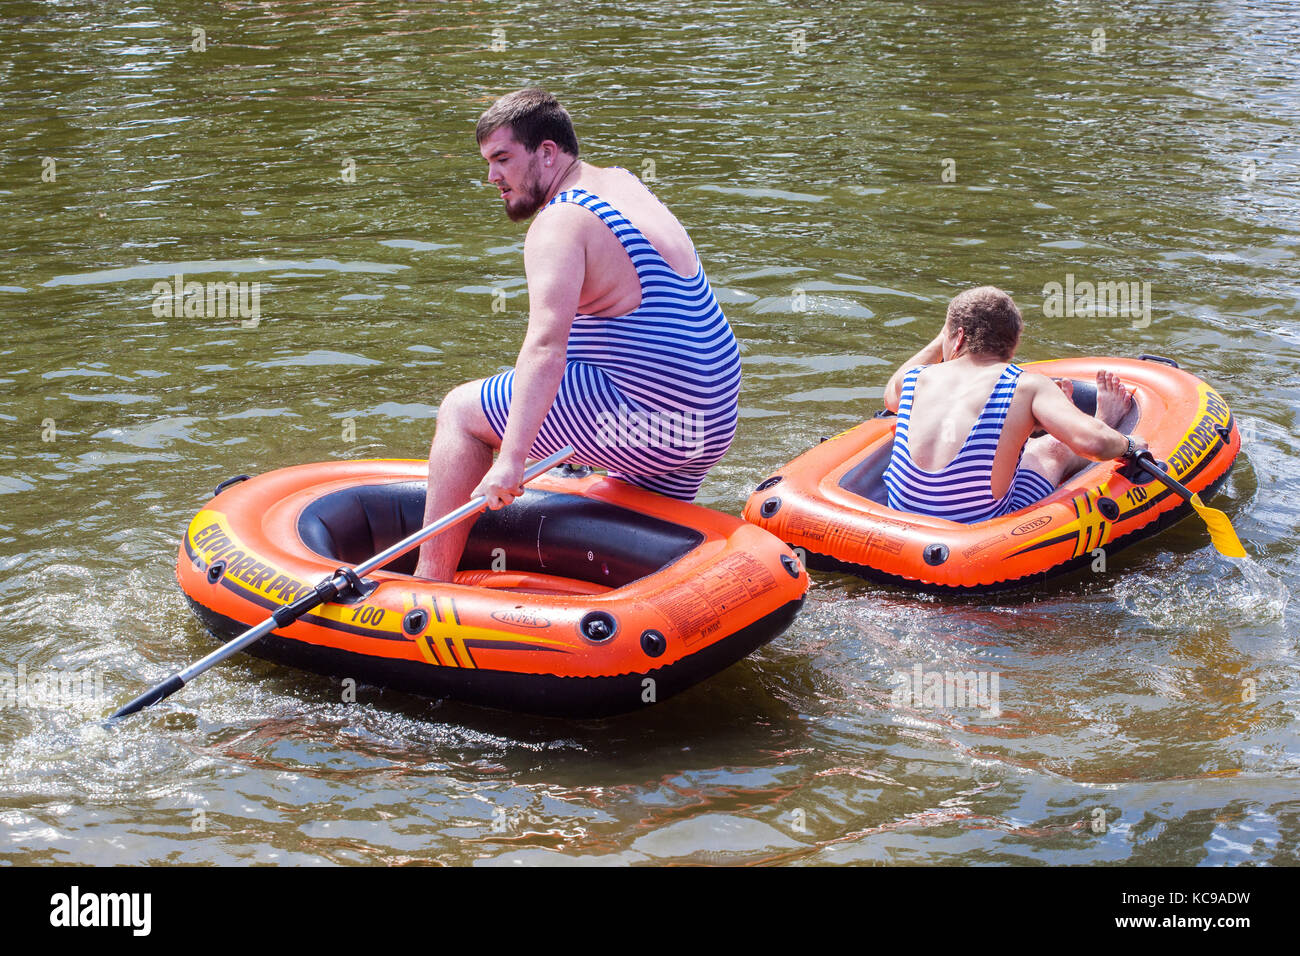 Two men in inflatable boats in striped swimsuits, summer fun on the water, striped bathing suit Stock Photo